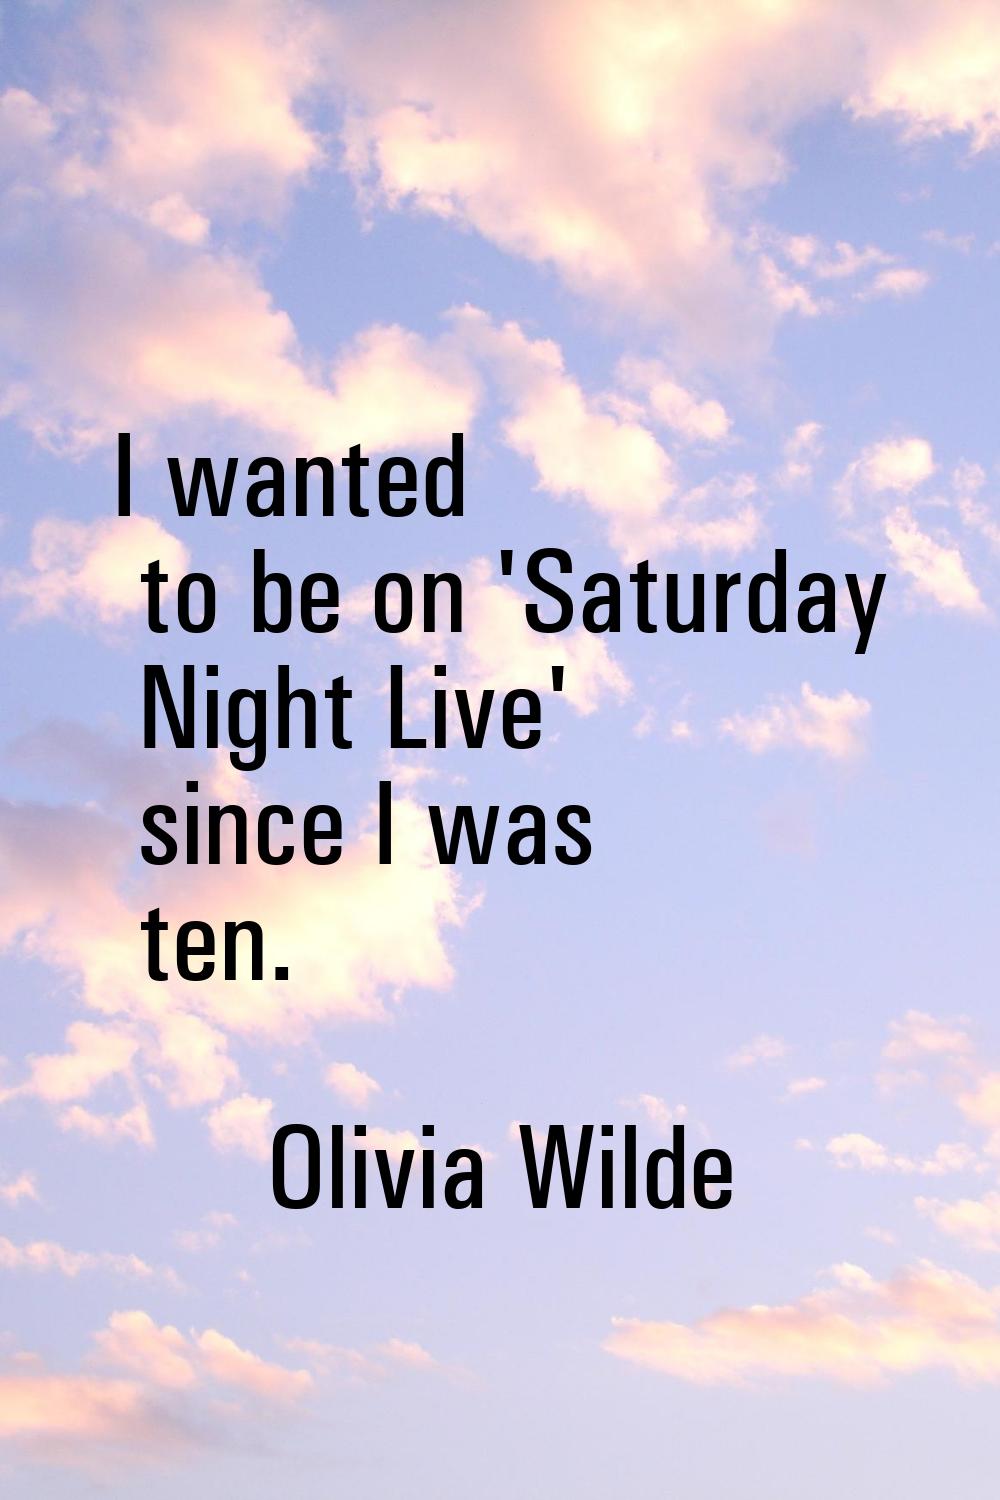 I wanted to be on 'Saturday Night Live' since I was ten.